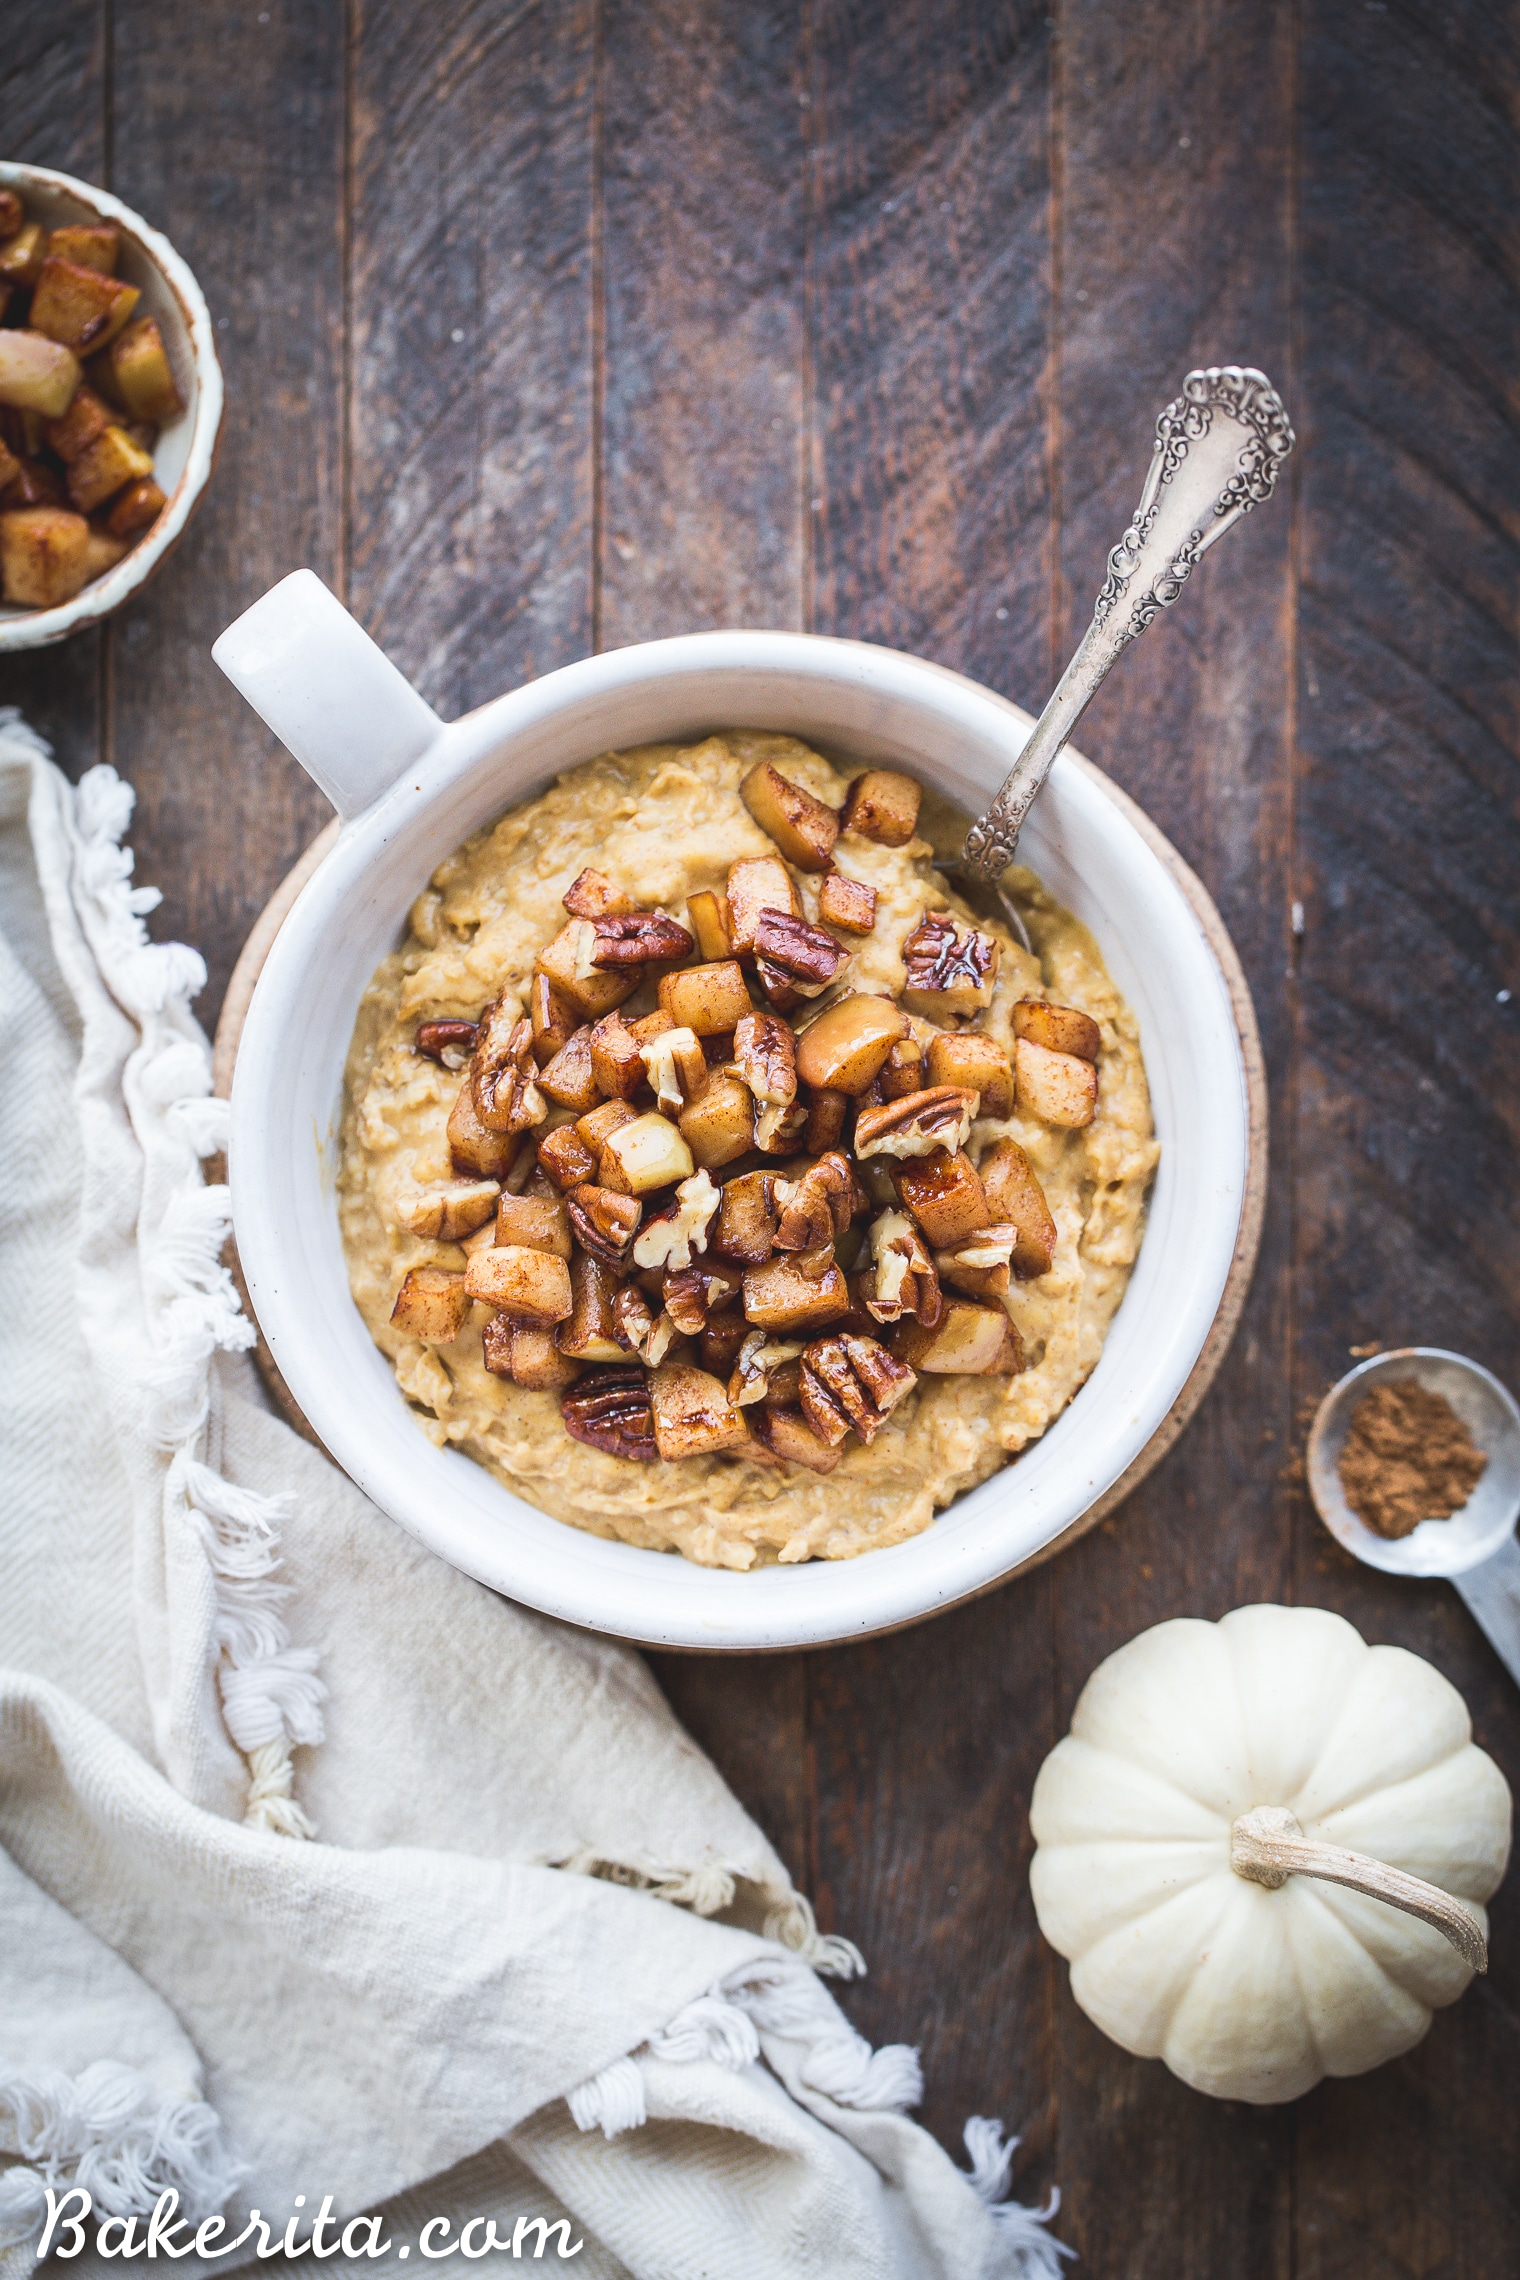 This Pumpkin Spice Oatmeal is rich, creamy, and perfect for chilly fall mornings. It's lightly sweetened with maple syrup and topped with warm sauteed apples. It's also gluten free and vegan. 